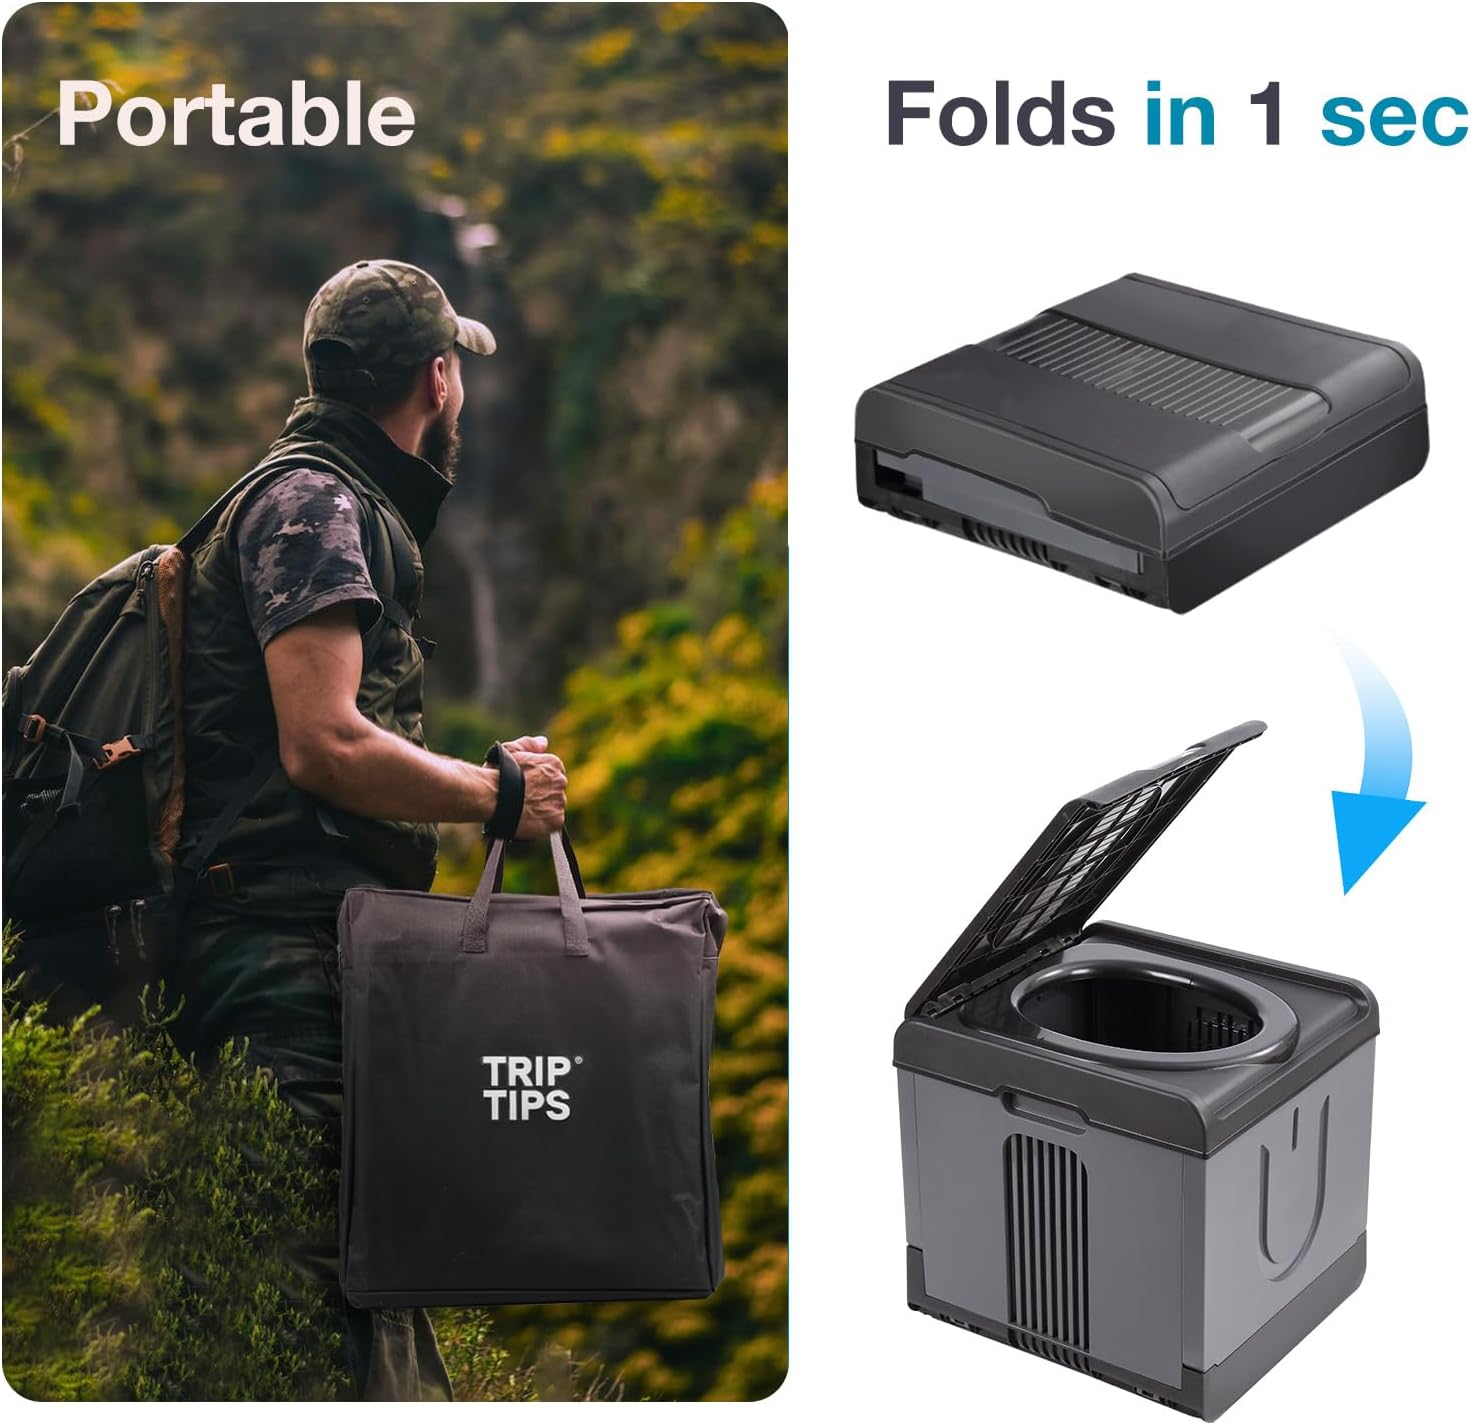 TRIPTIPS Updated Portable Potty for Camping Extra Large Folding Camping Toilet Portable Toilet for Adults Car Toilet Camp Toilet Outdoor Toilet for Boat/Hiking/Long Trips/Beach